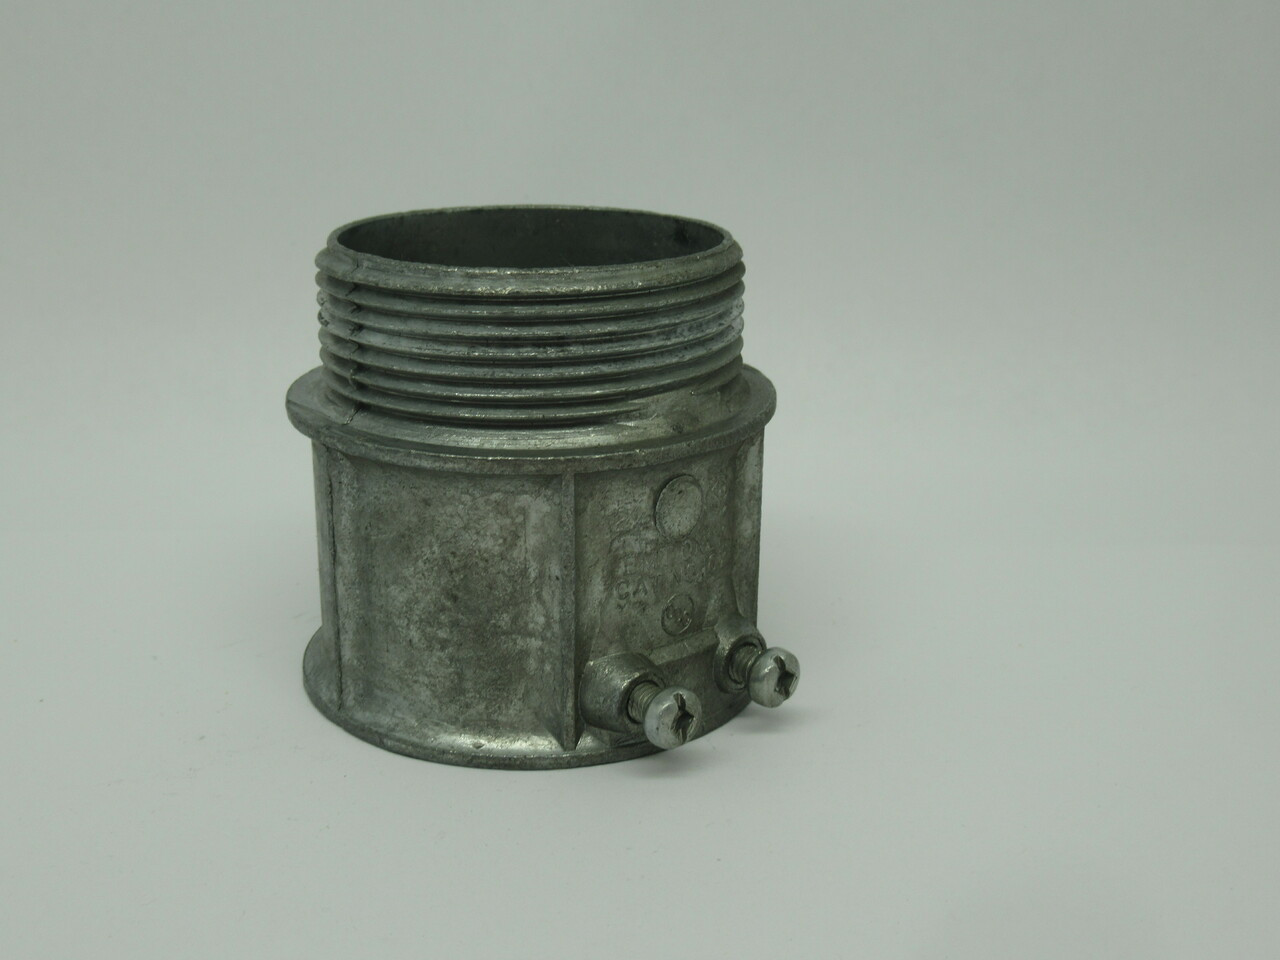 ODC 107 Set Screw Connector 2-1/2" MISSING LOCK NUT USED